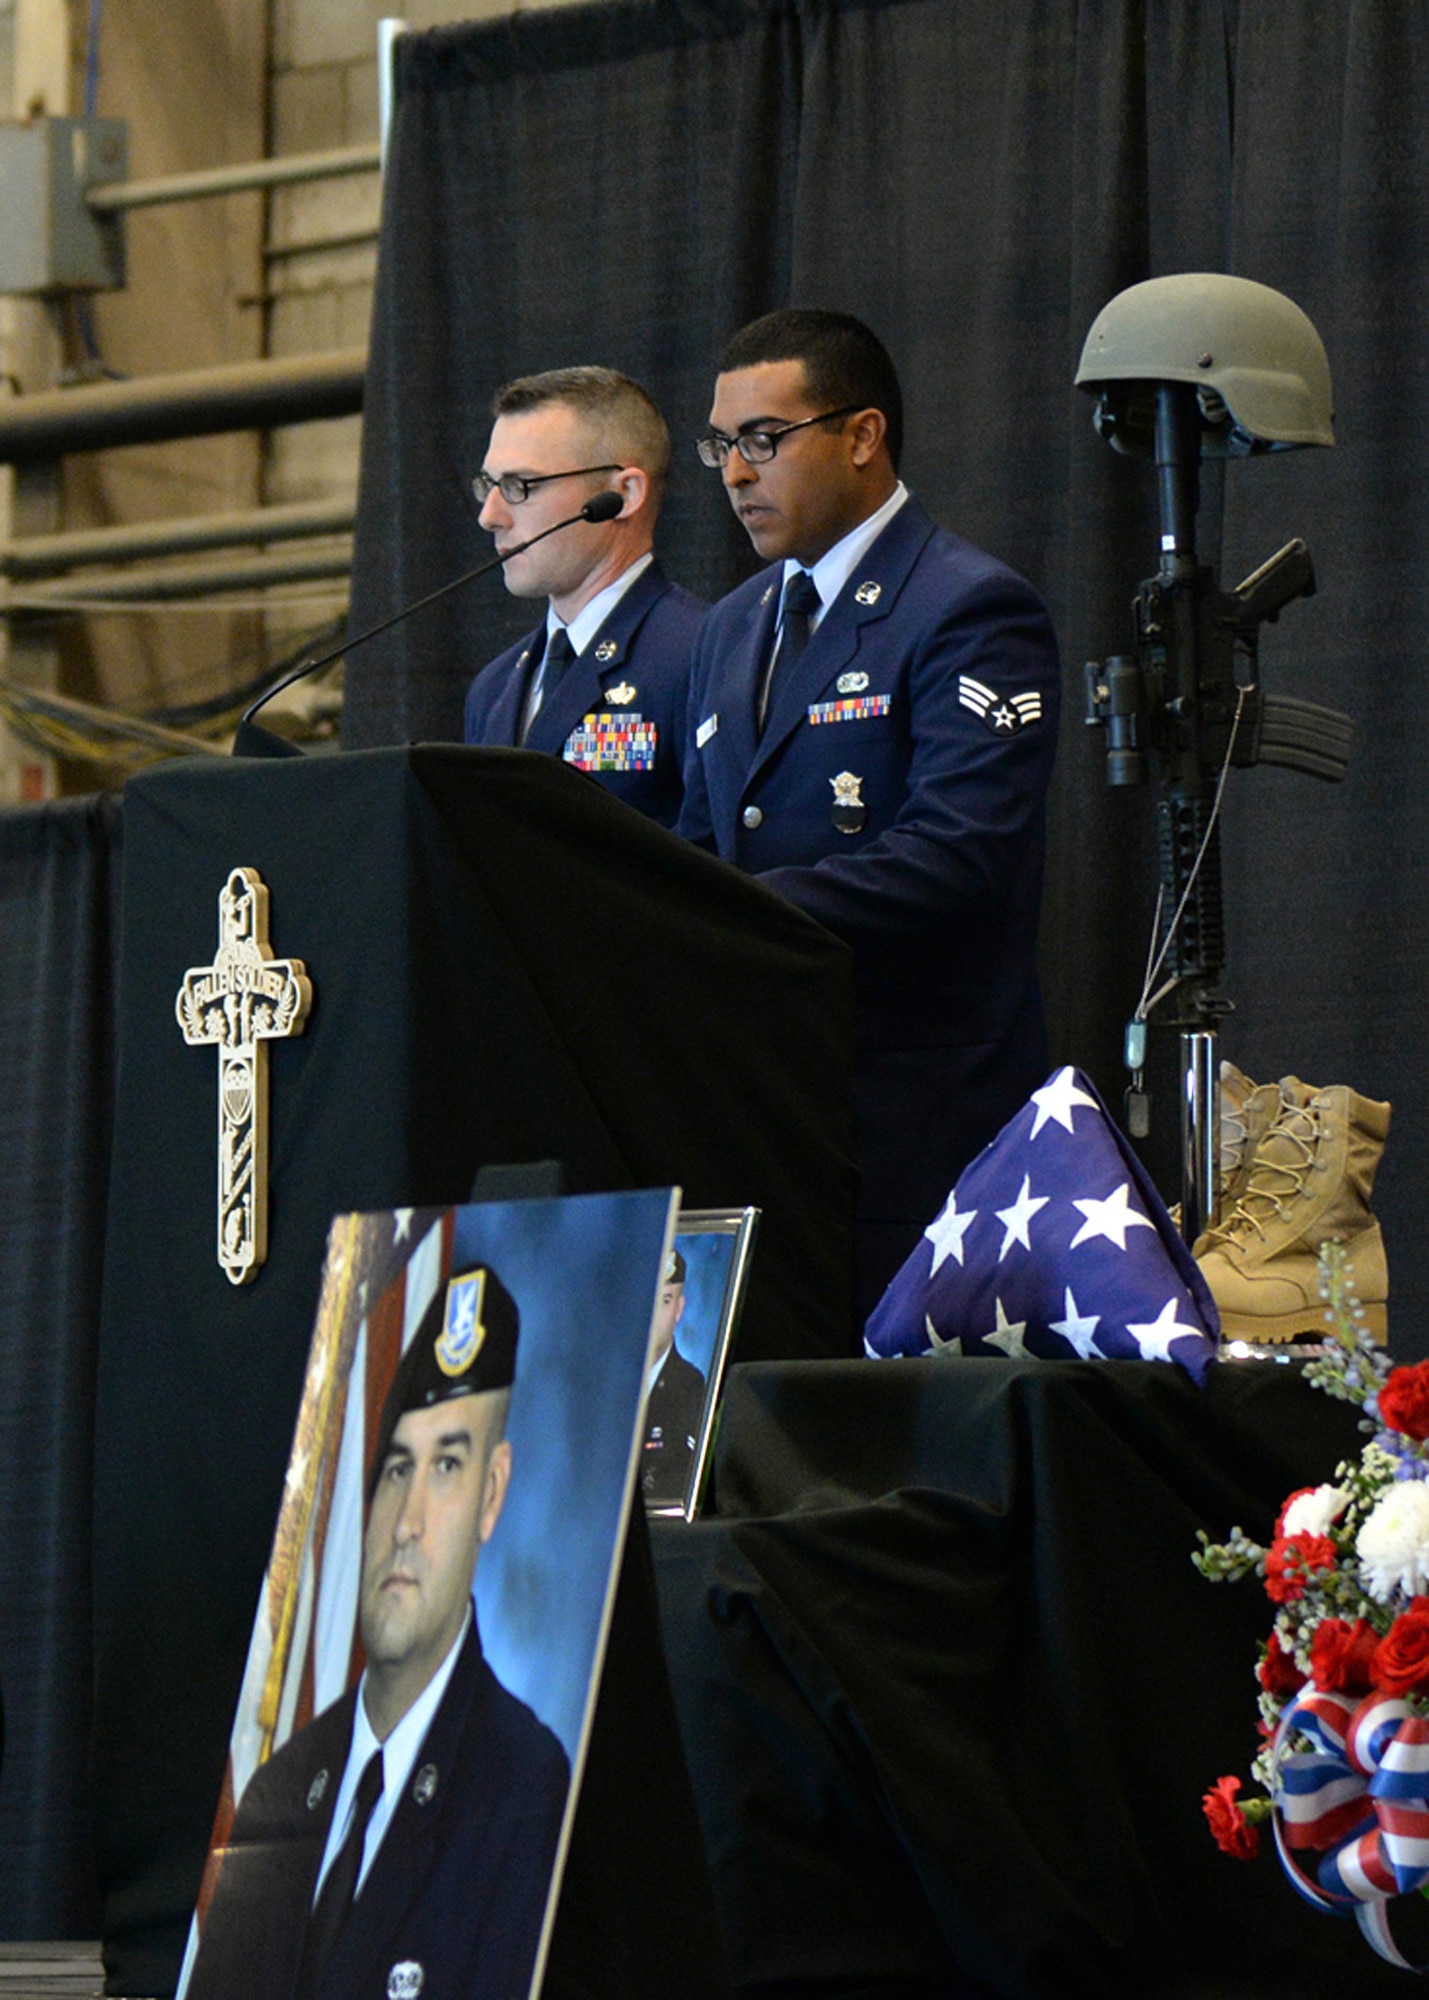 Senior Airman Wilyaveh Cruz-Santiago (right) reads Senior Airman Nathan Sartain's biography during a memorial service for Sartain and Senior Airman Kcey Ruiz at the Aero Club Hangar at Hanscom Air Force Base, Mass., Oct. 16, while Staff Sgt. Lee Shortell looks on. At the service, colleagues remembered the two fallen security forces Airmen, who were killed Oct. 2, when the C-130J Super Hercules they were on crashed shortly after takeoff from Jalalabad, Afghanistan. (U.S. Air Force photo/)